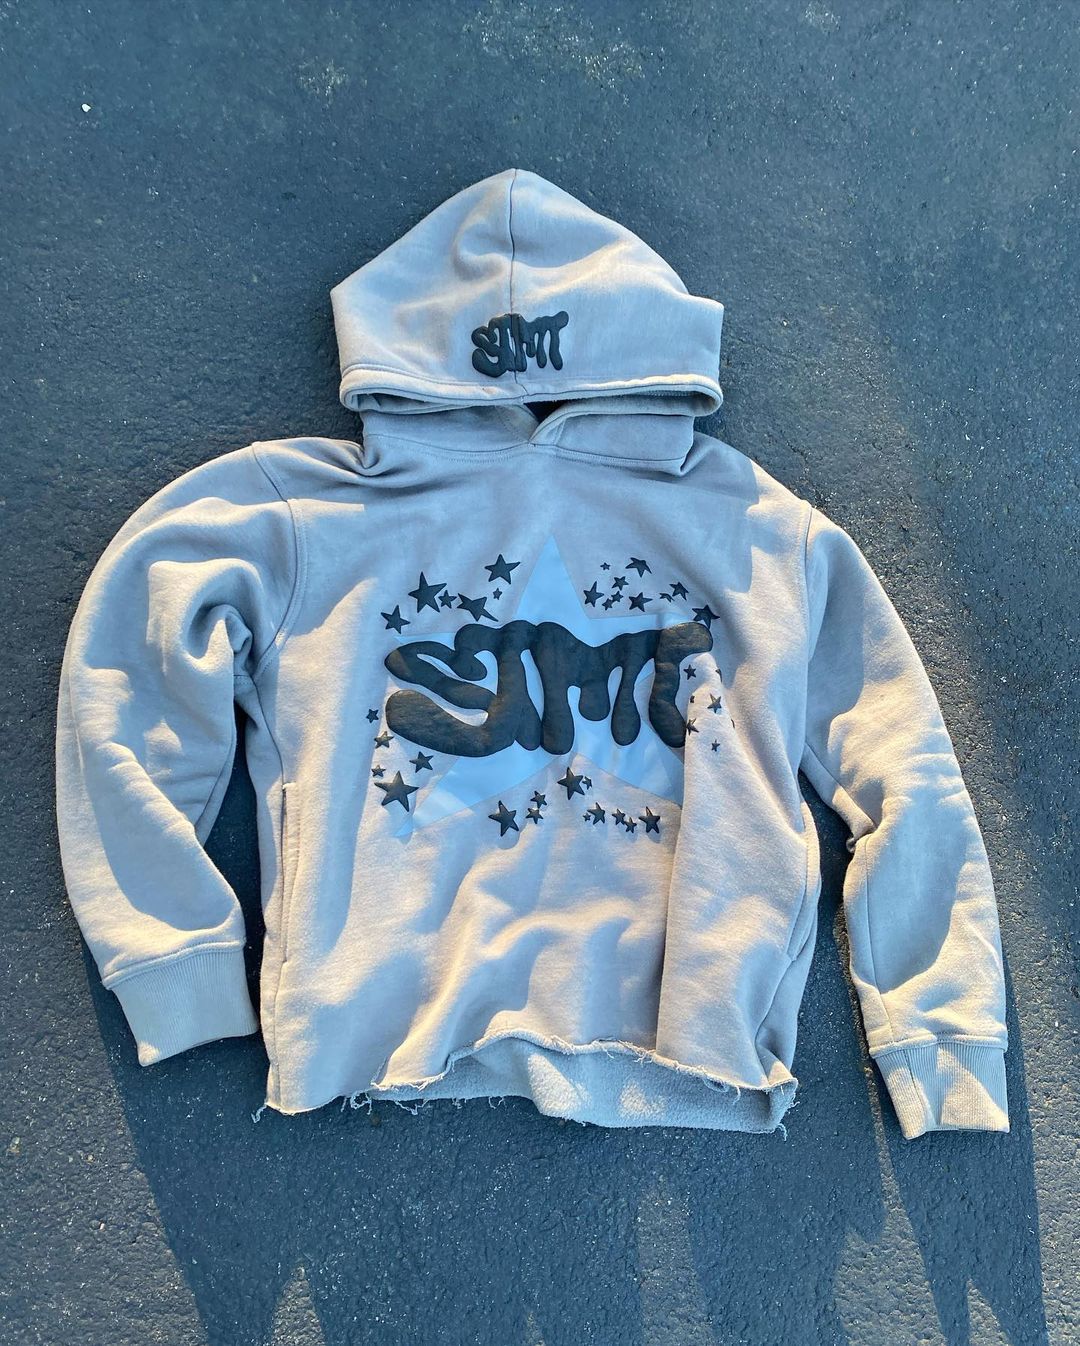 hot-selling new street trend letter printing design sweatshirts for men and women with foam printing